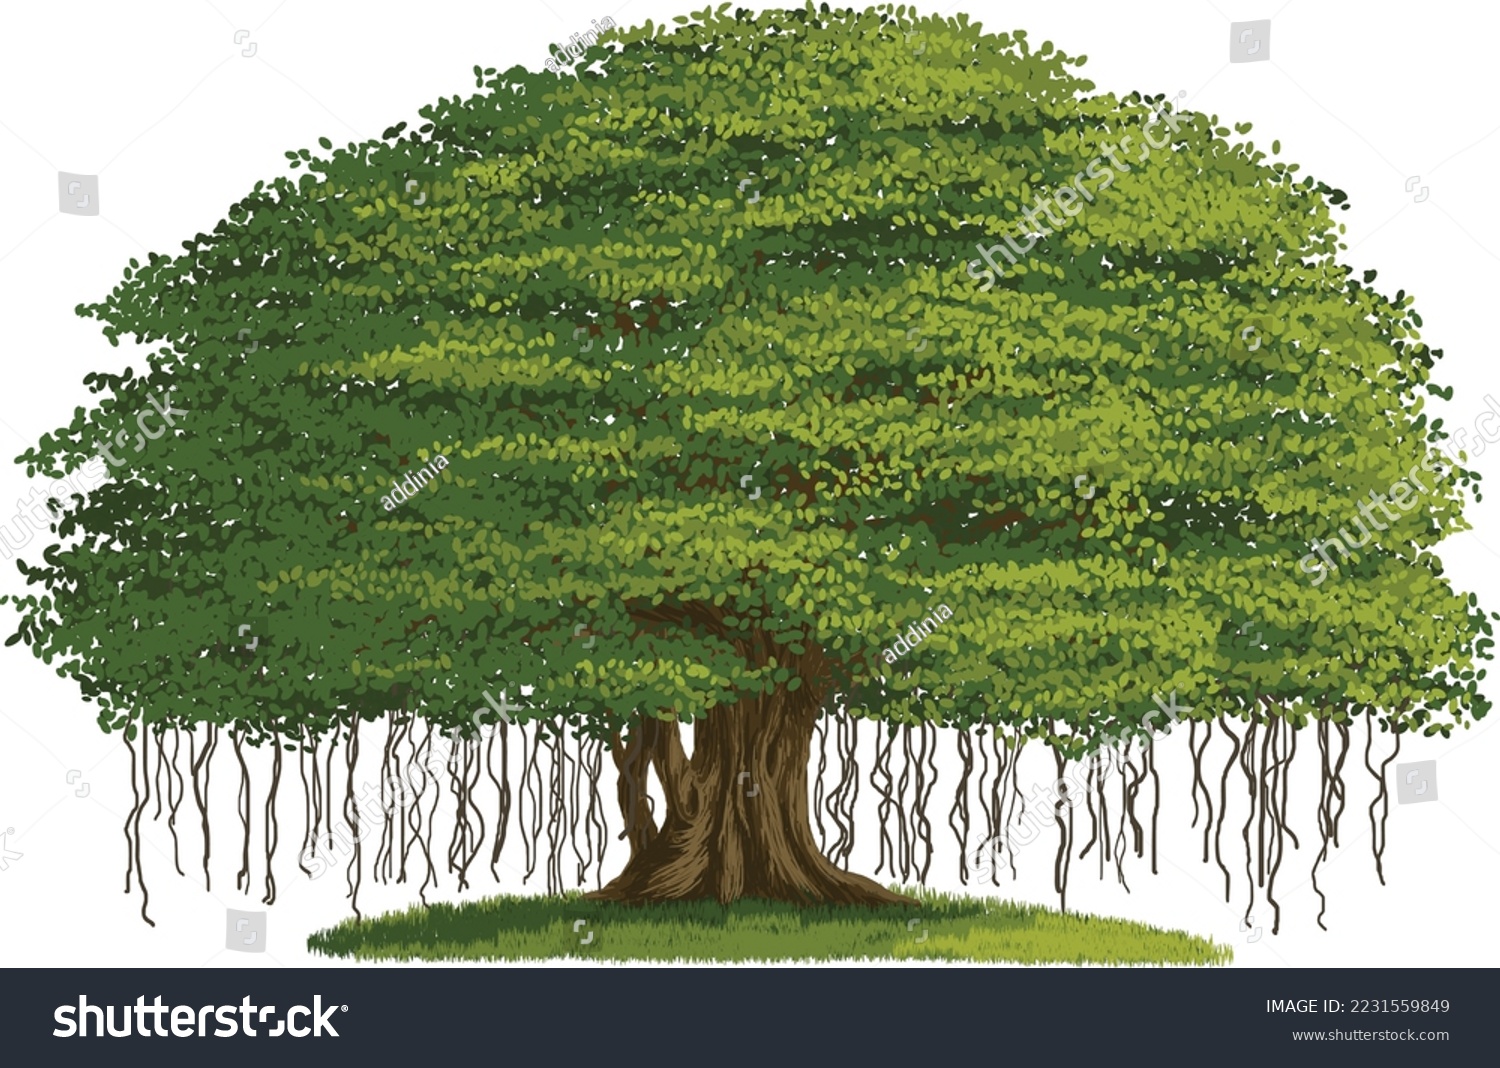 SVG of A Banyan tree, big and lush, vector illustration isolated on white background, EPS svg